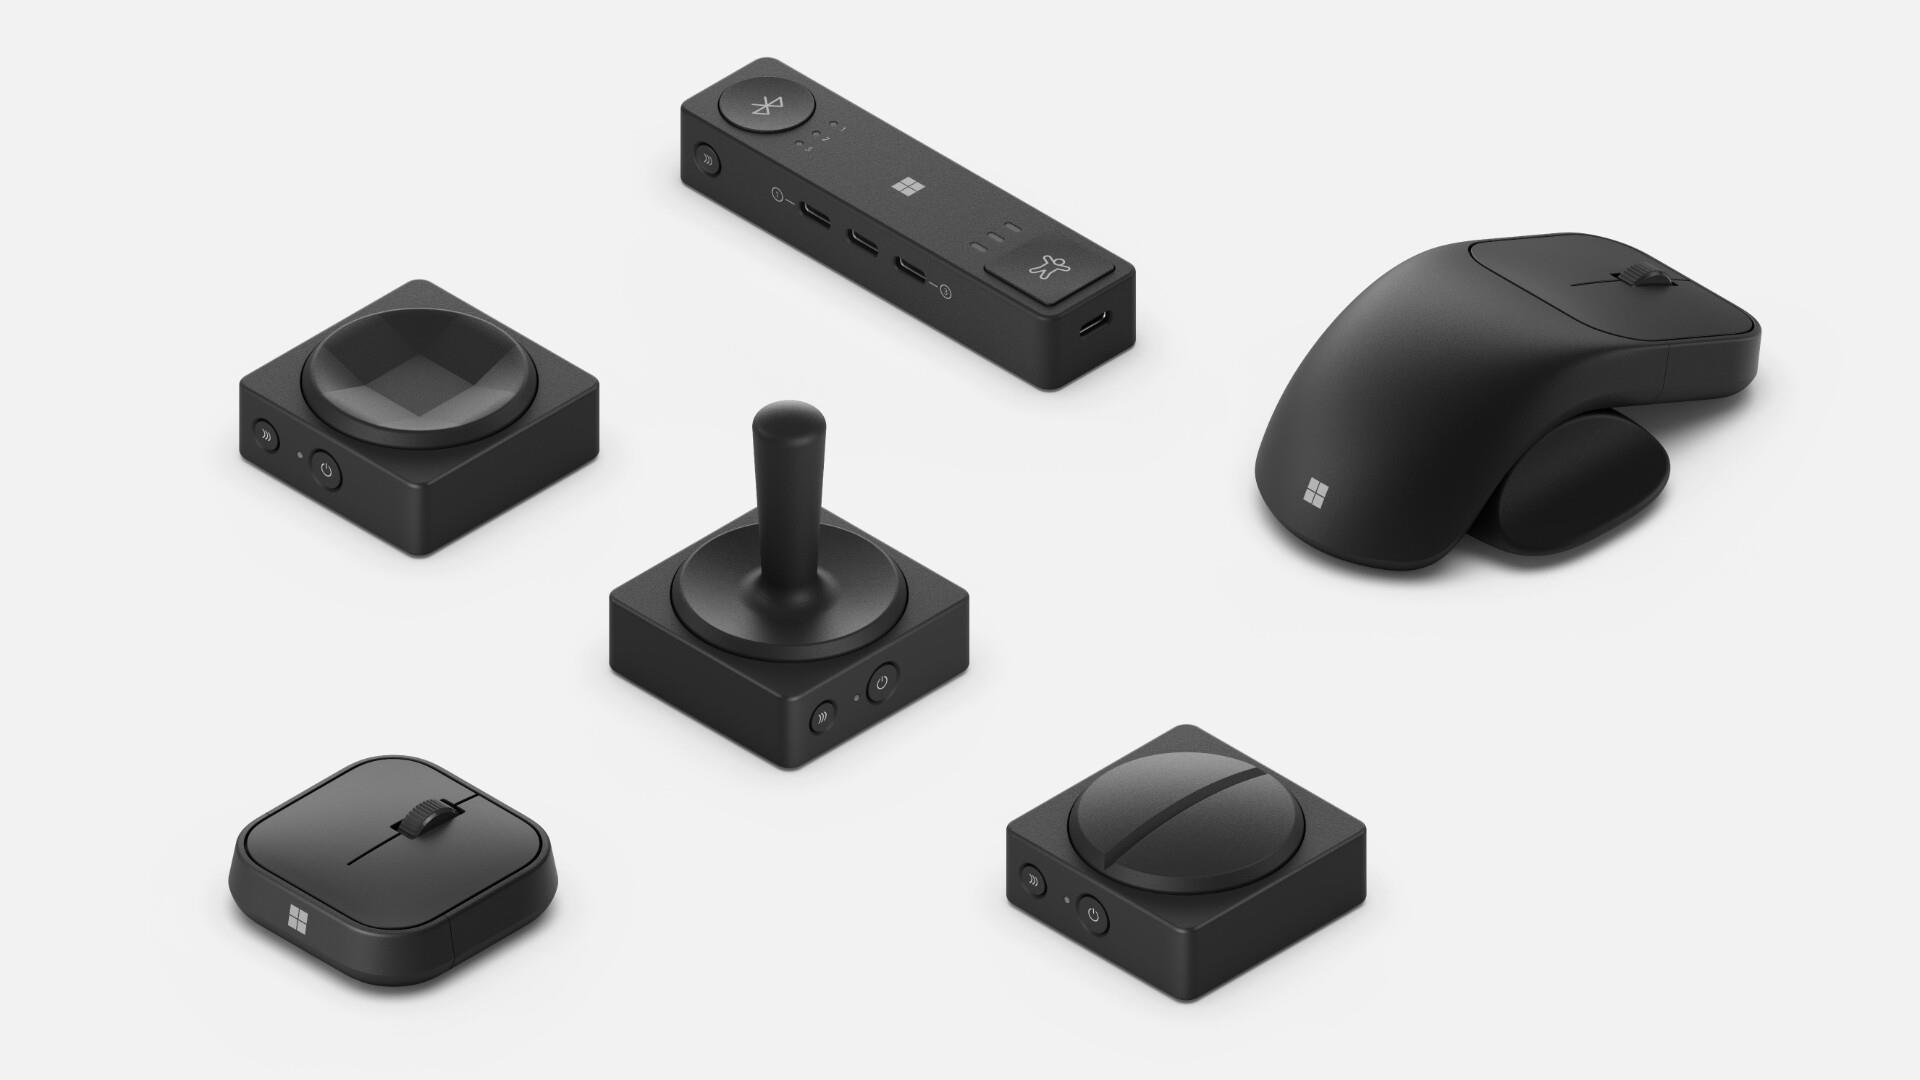 Microsoft Adaptive Accessories for Business